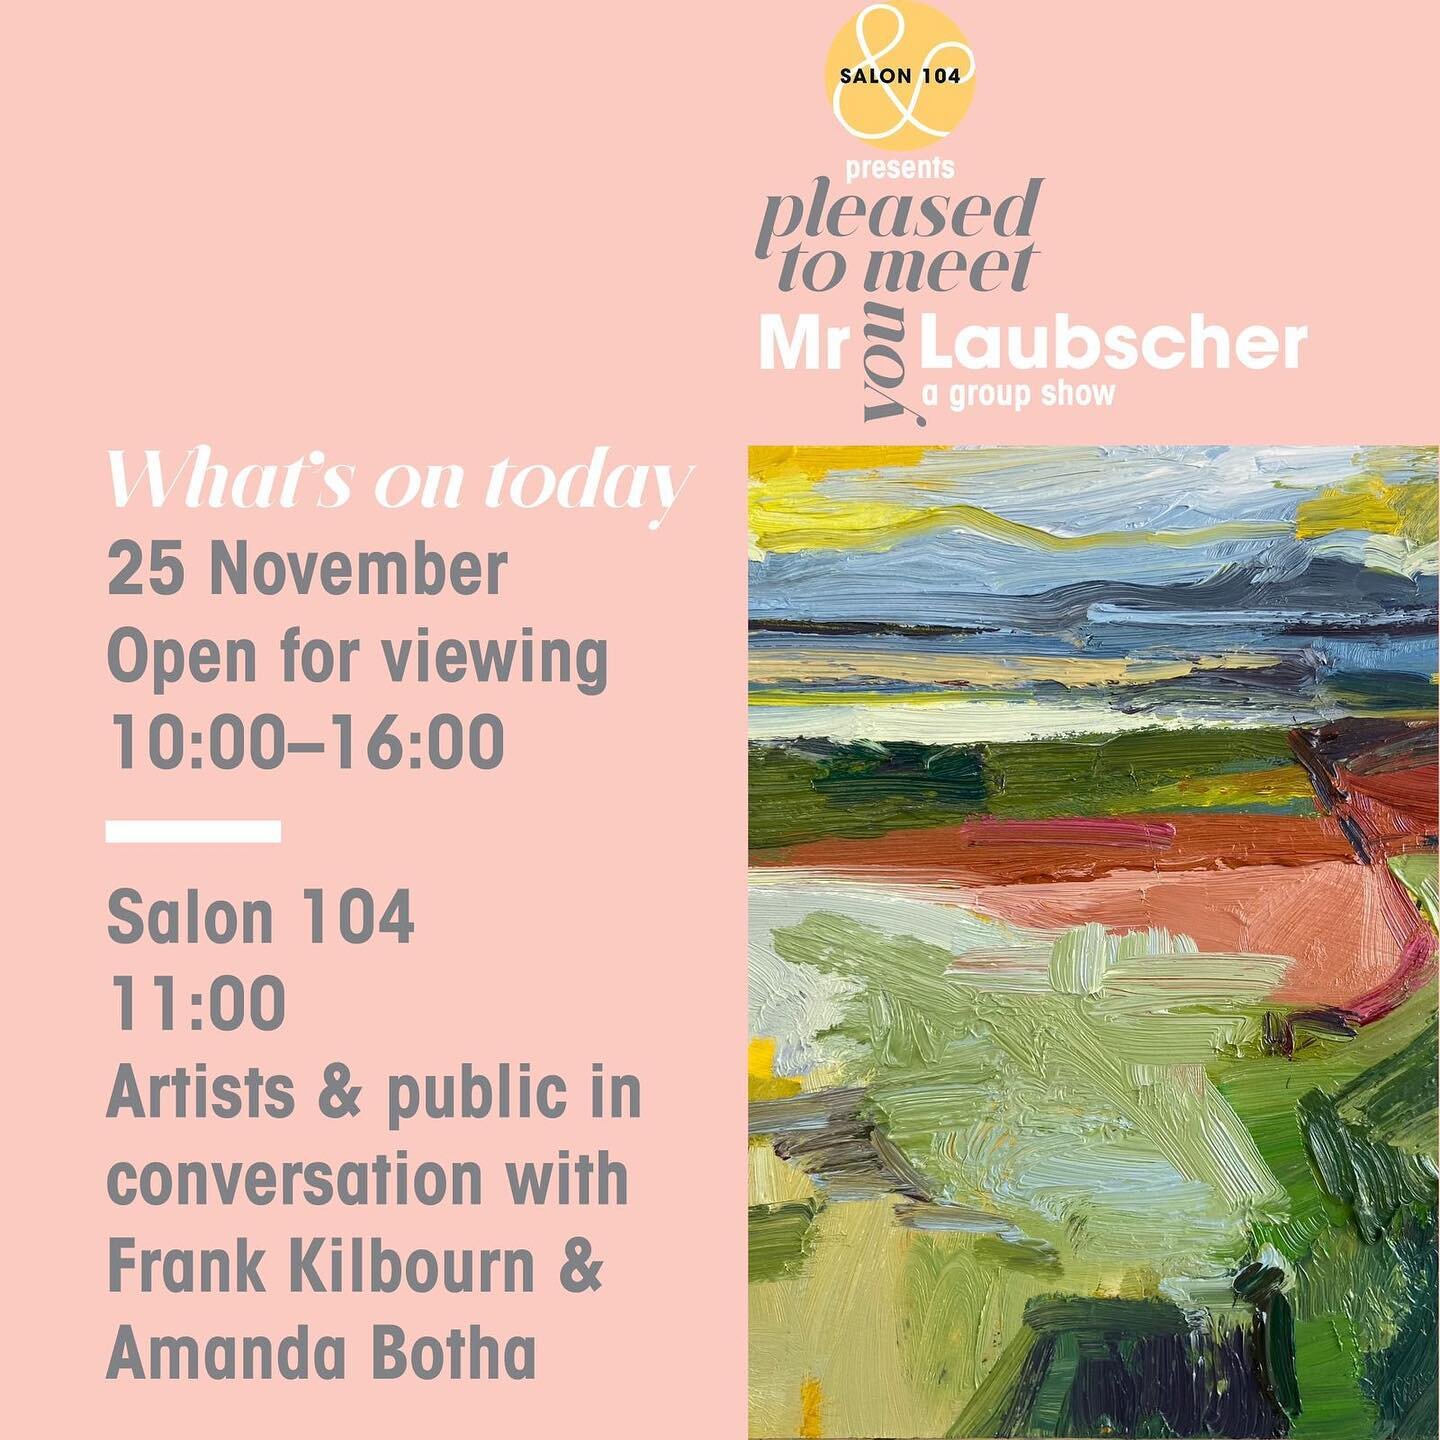 Today&rsquo;s the day for our @salon104.art Salon-style conversation! Join us at 11am for a special morning talking with Frank Kilbourn and Amanda Botha about the meaning of friendship in art. I will be facilitating, and many of the 11 participating 